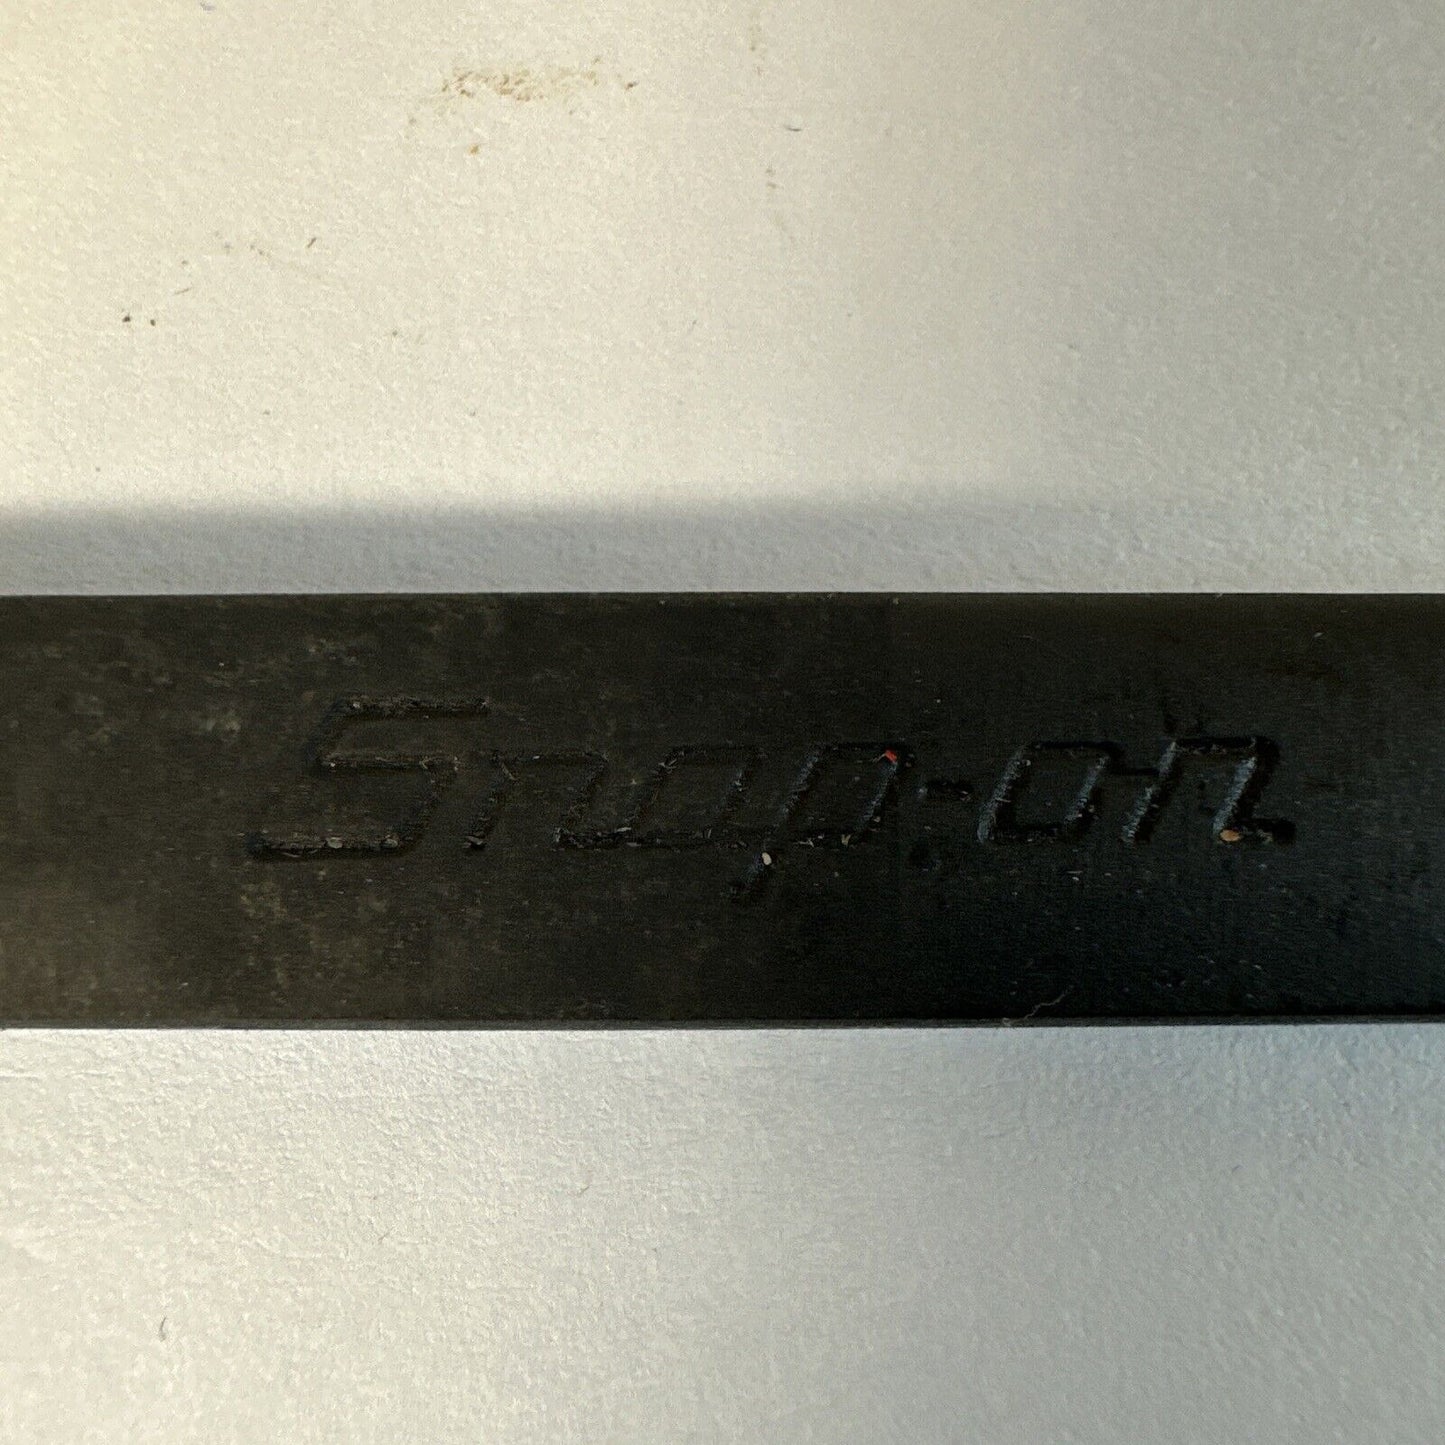 Snap On 12 mm 12-Point Metric Flank Drive® Combination Wrench